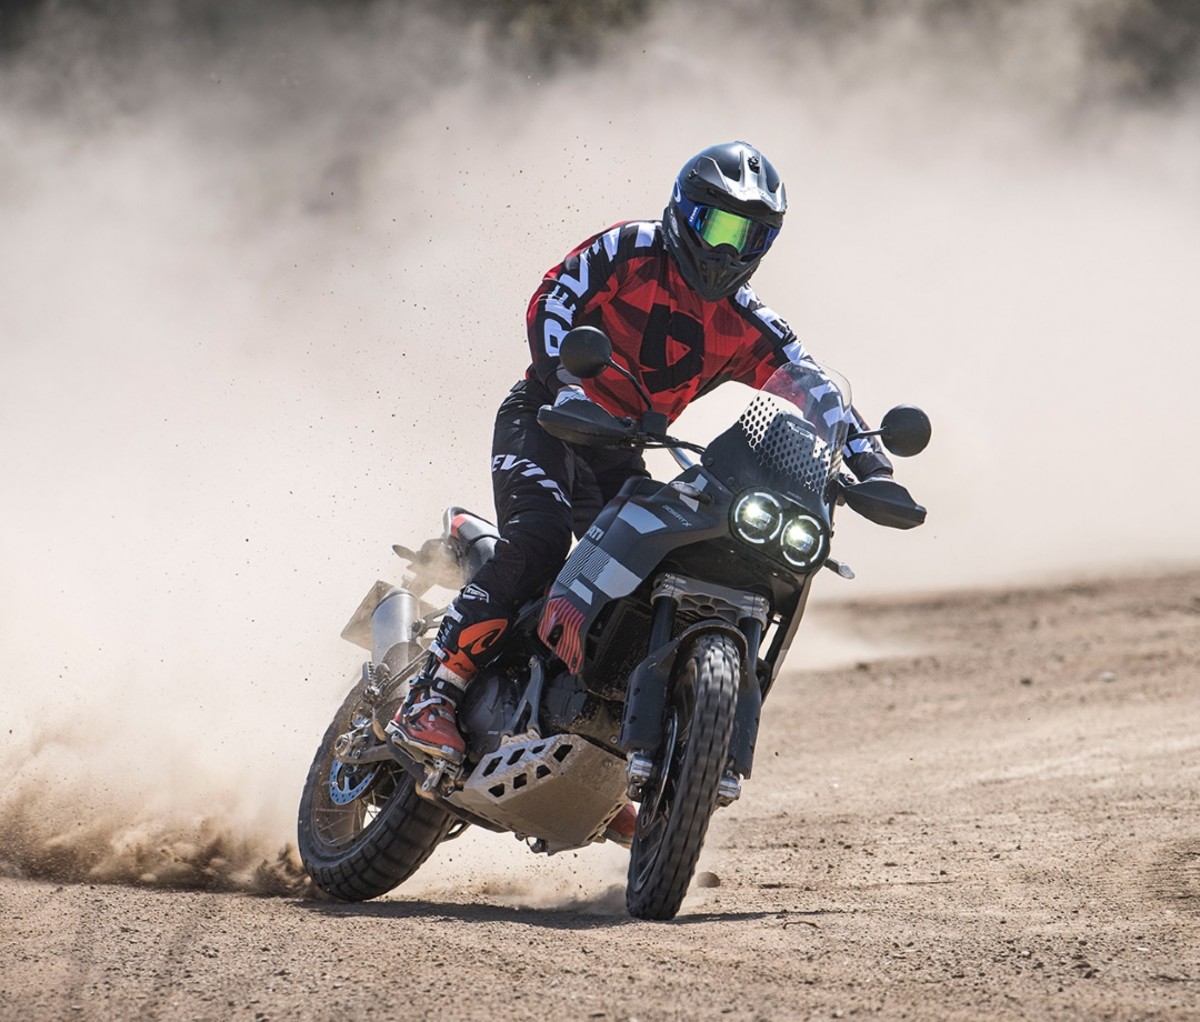 Adventure motorcycle with rider taking a sliding turn on a dirt track.